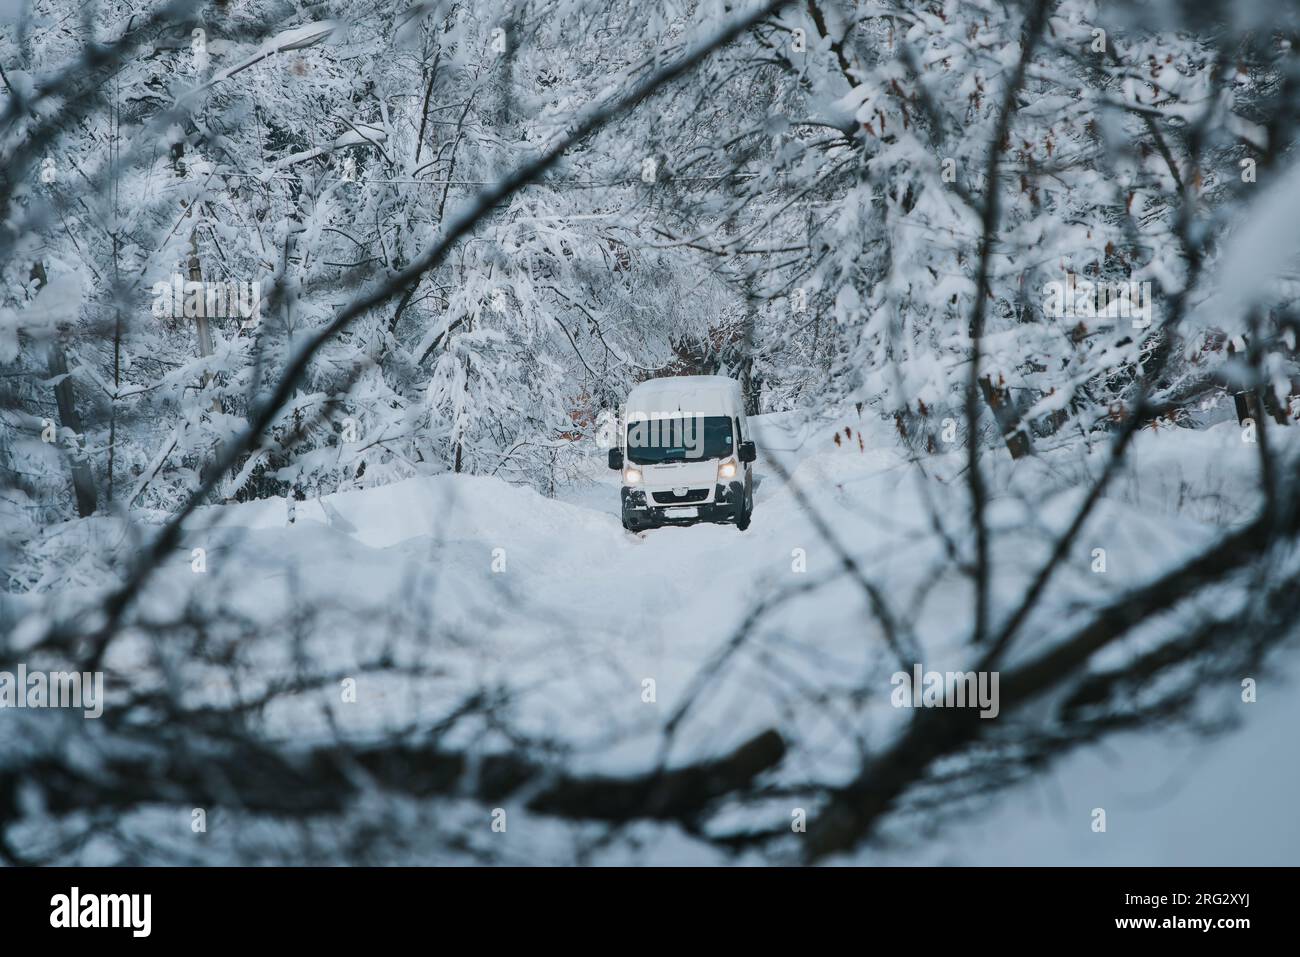 Truck stuck on the road in front of a fallen tree Stock Photo